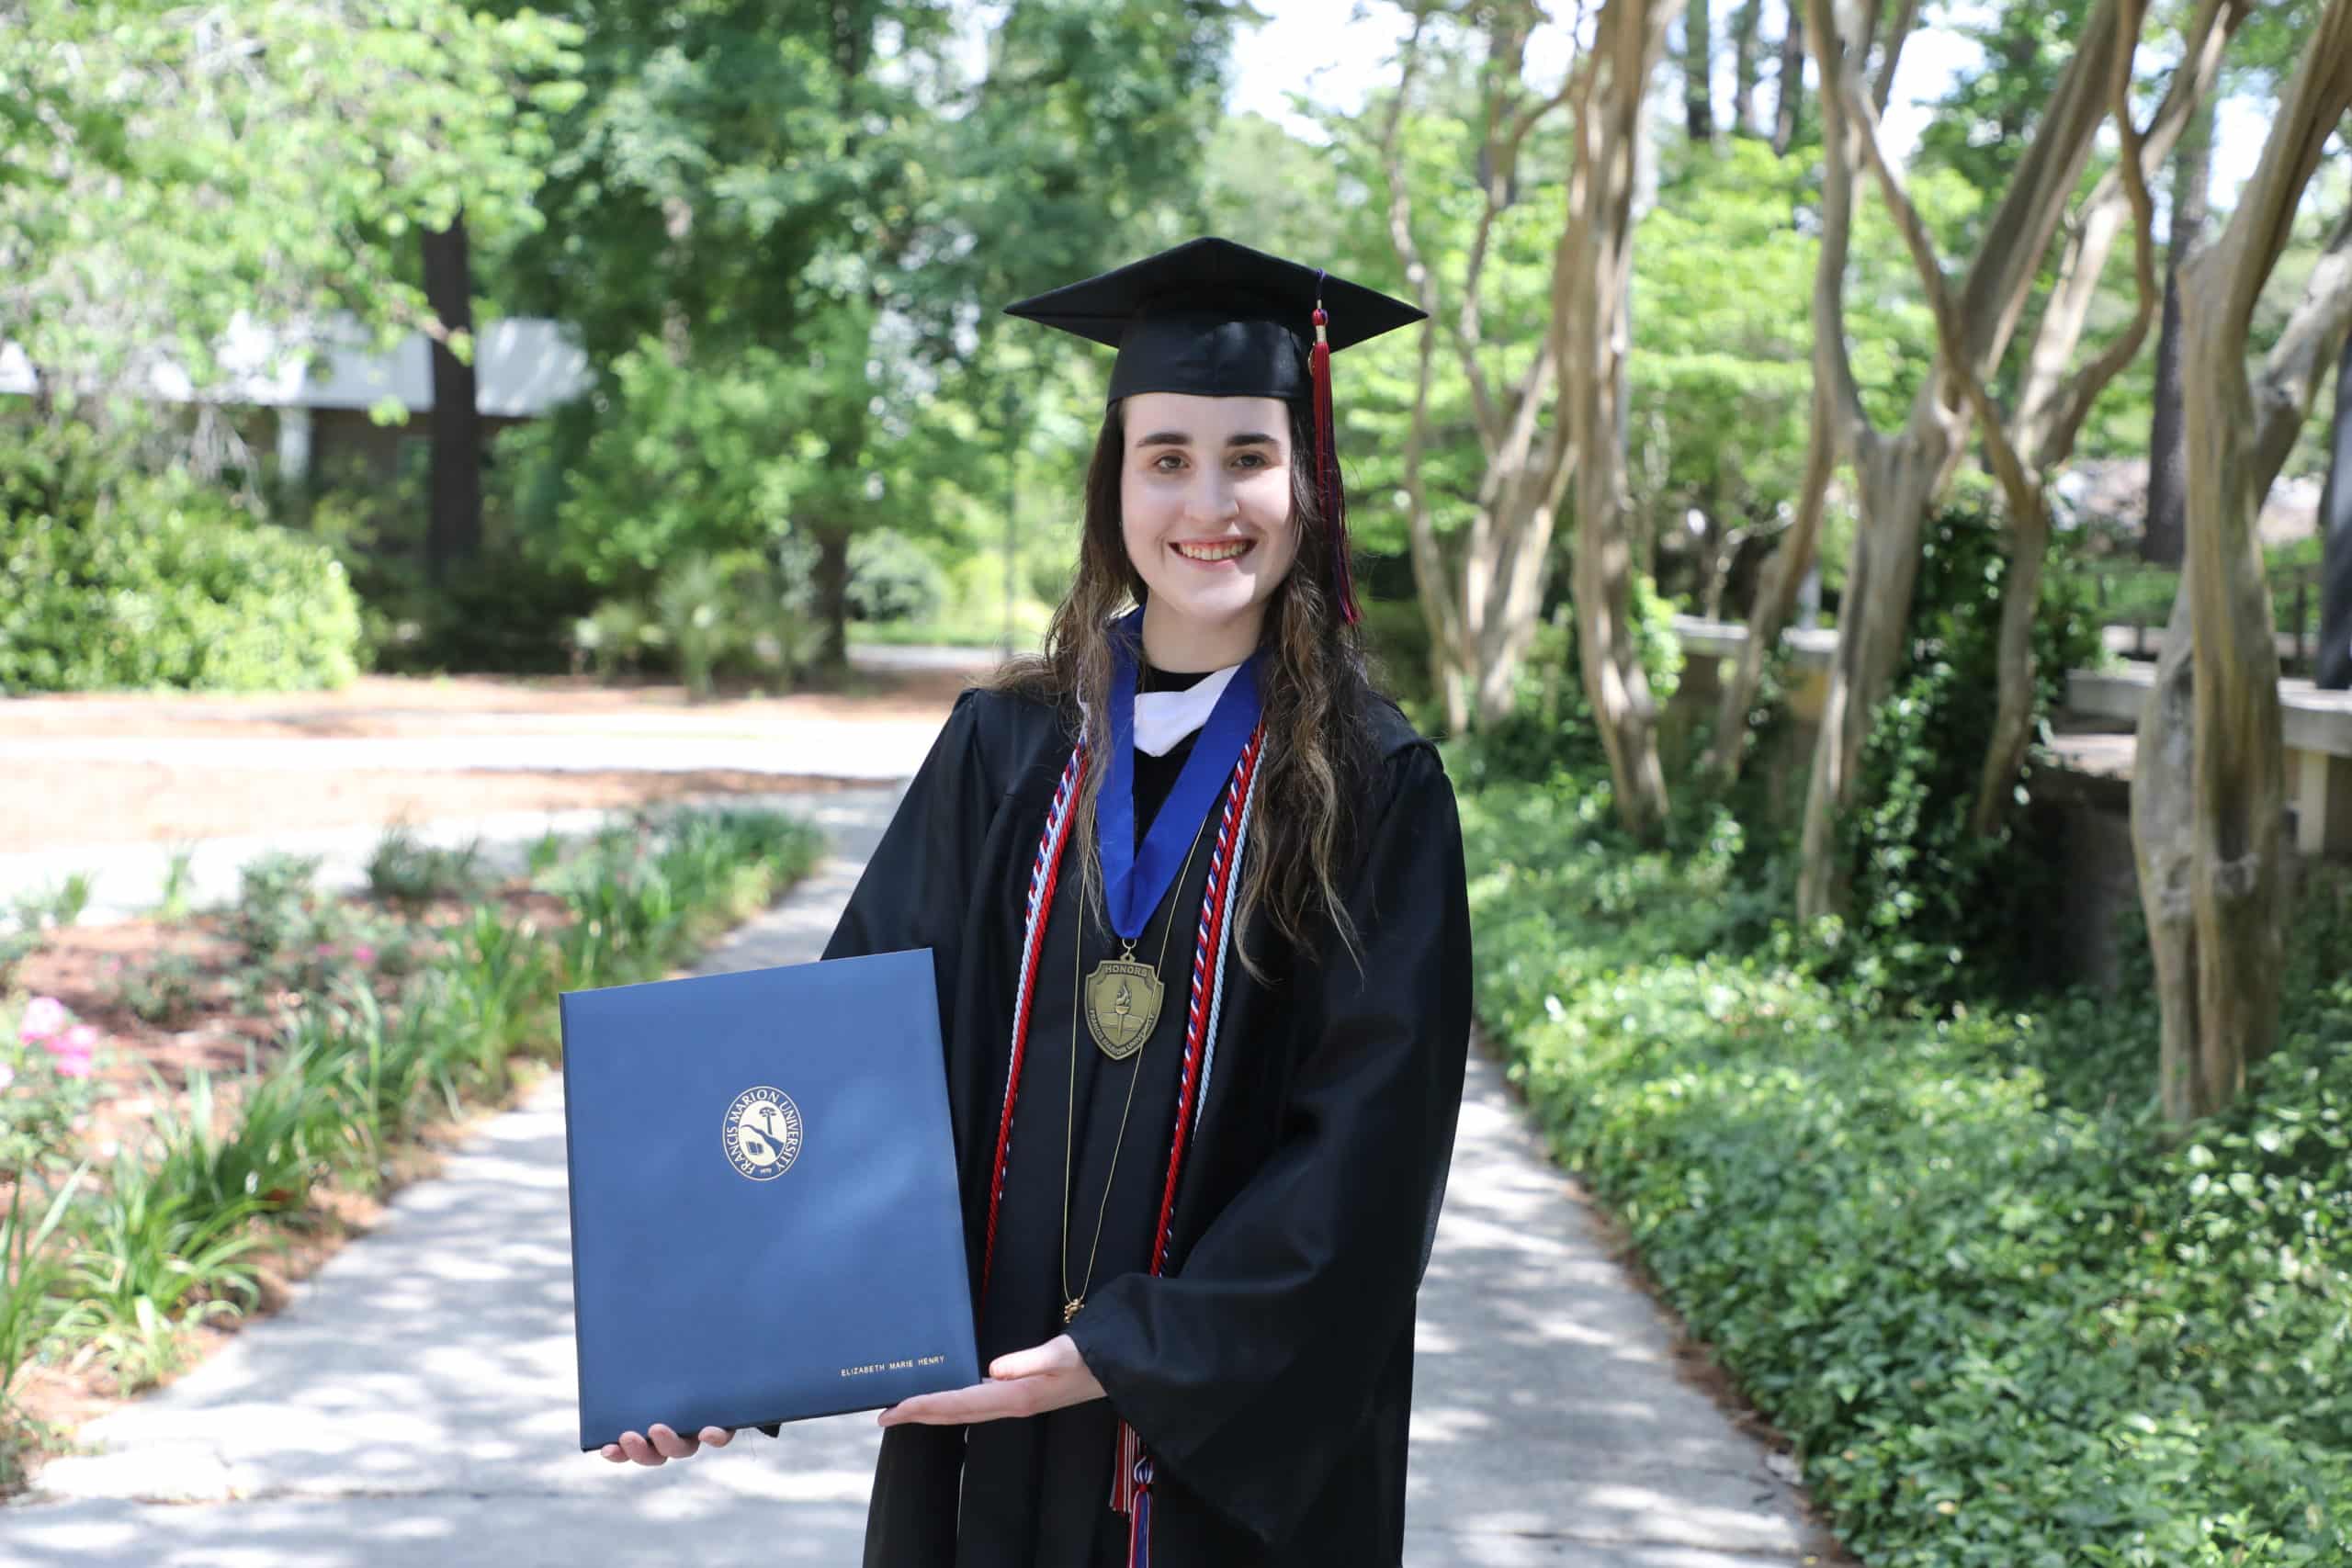 History is the future for standout FMU grad